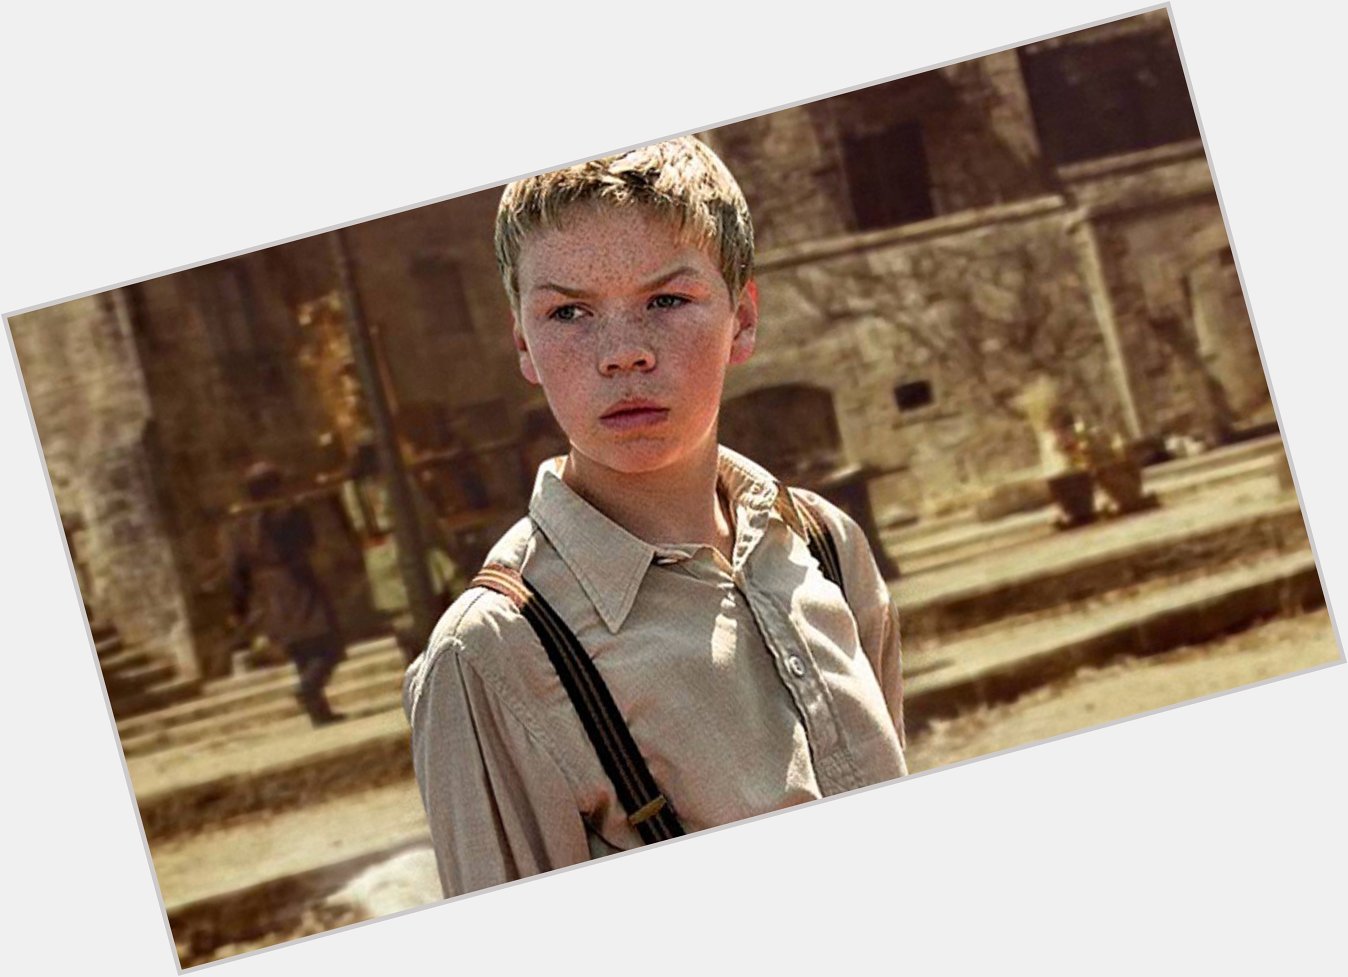 Talk about puberty hitting hard

Happy 29th birthday Will Poulter! Hope to see more of his performances soon 